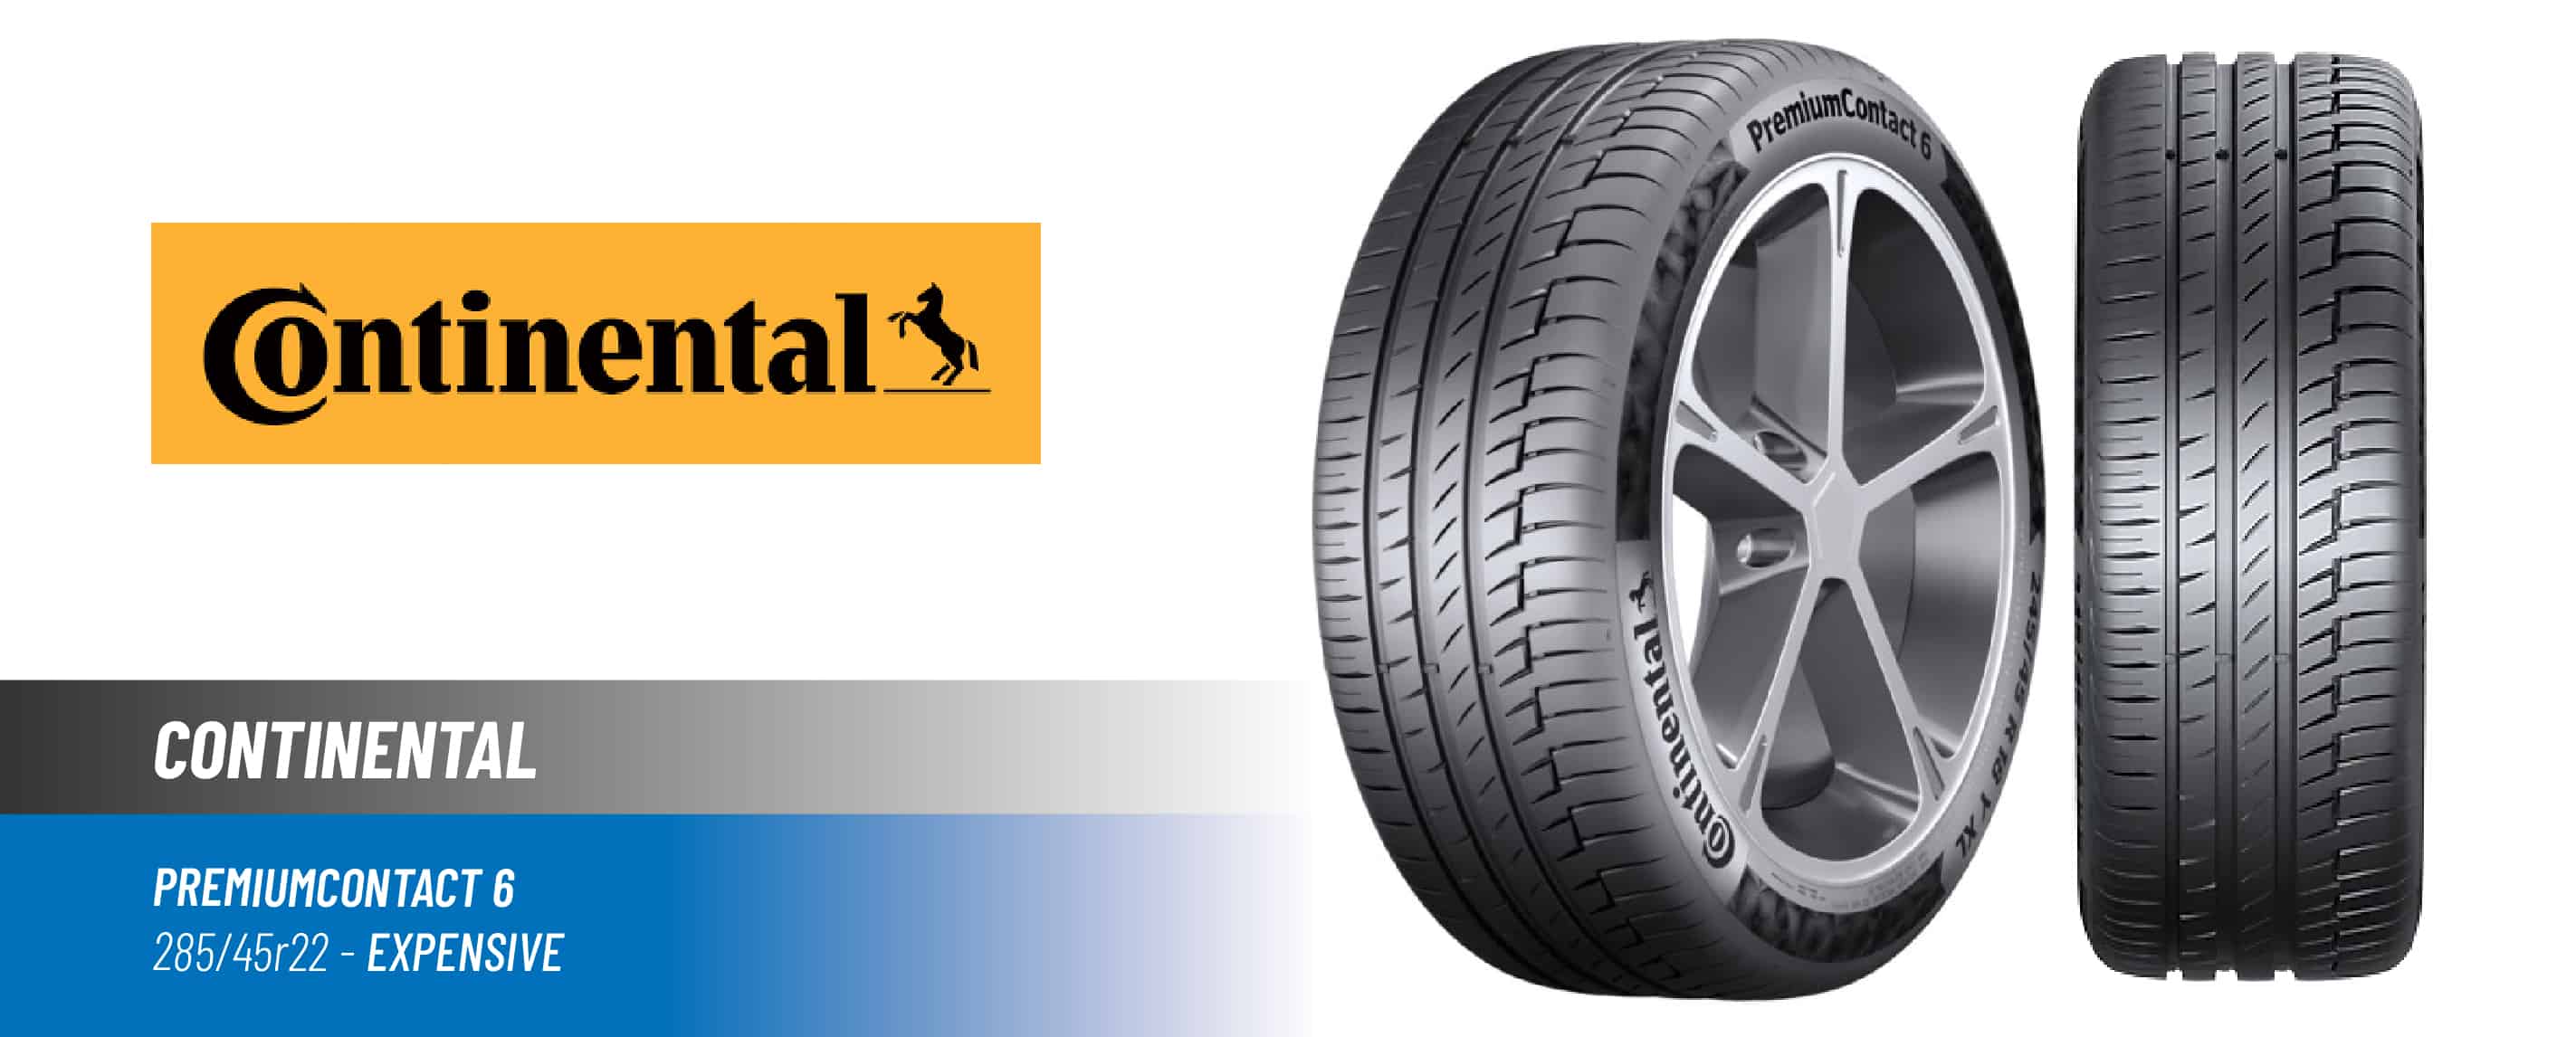 Top#2 High Price: Continental PremiumContact 6 – best 285/45r22